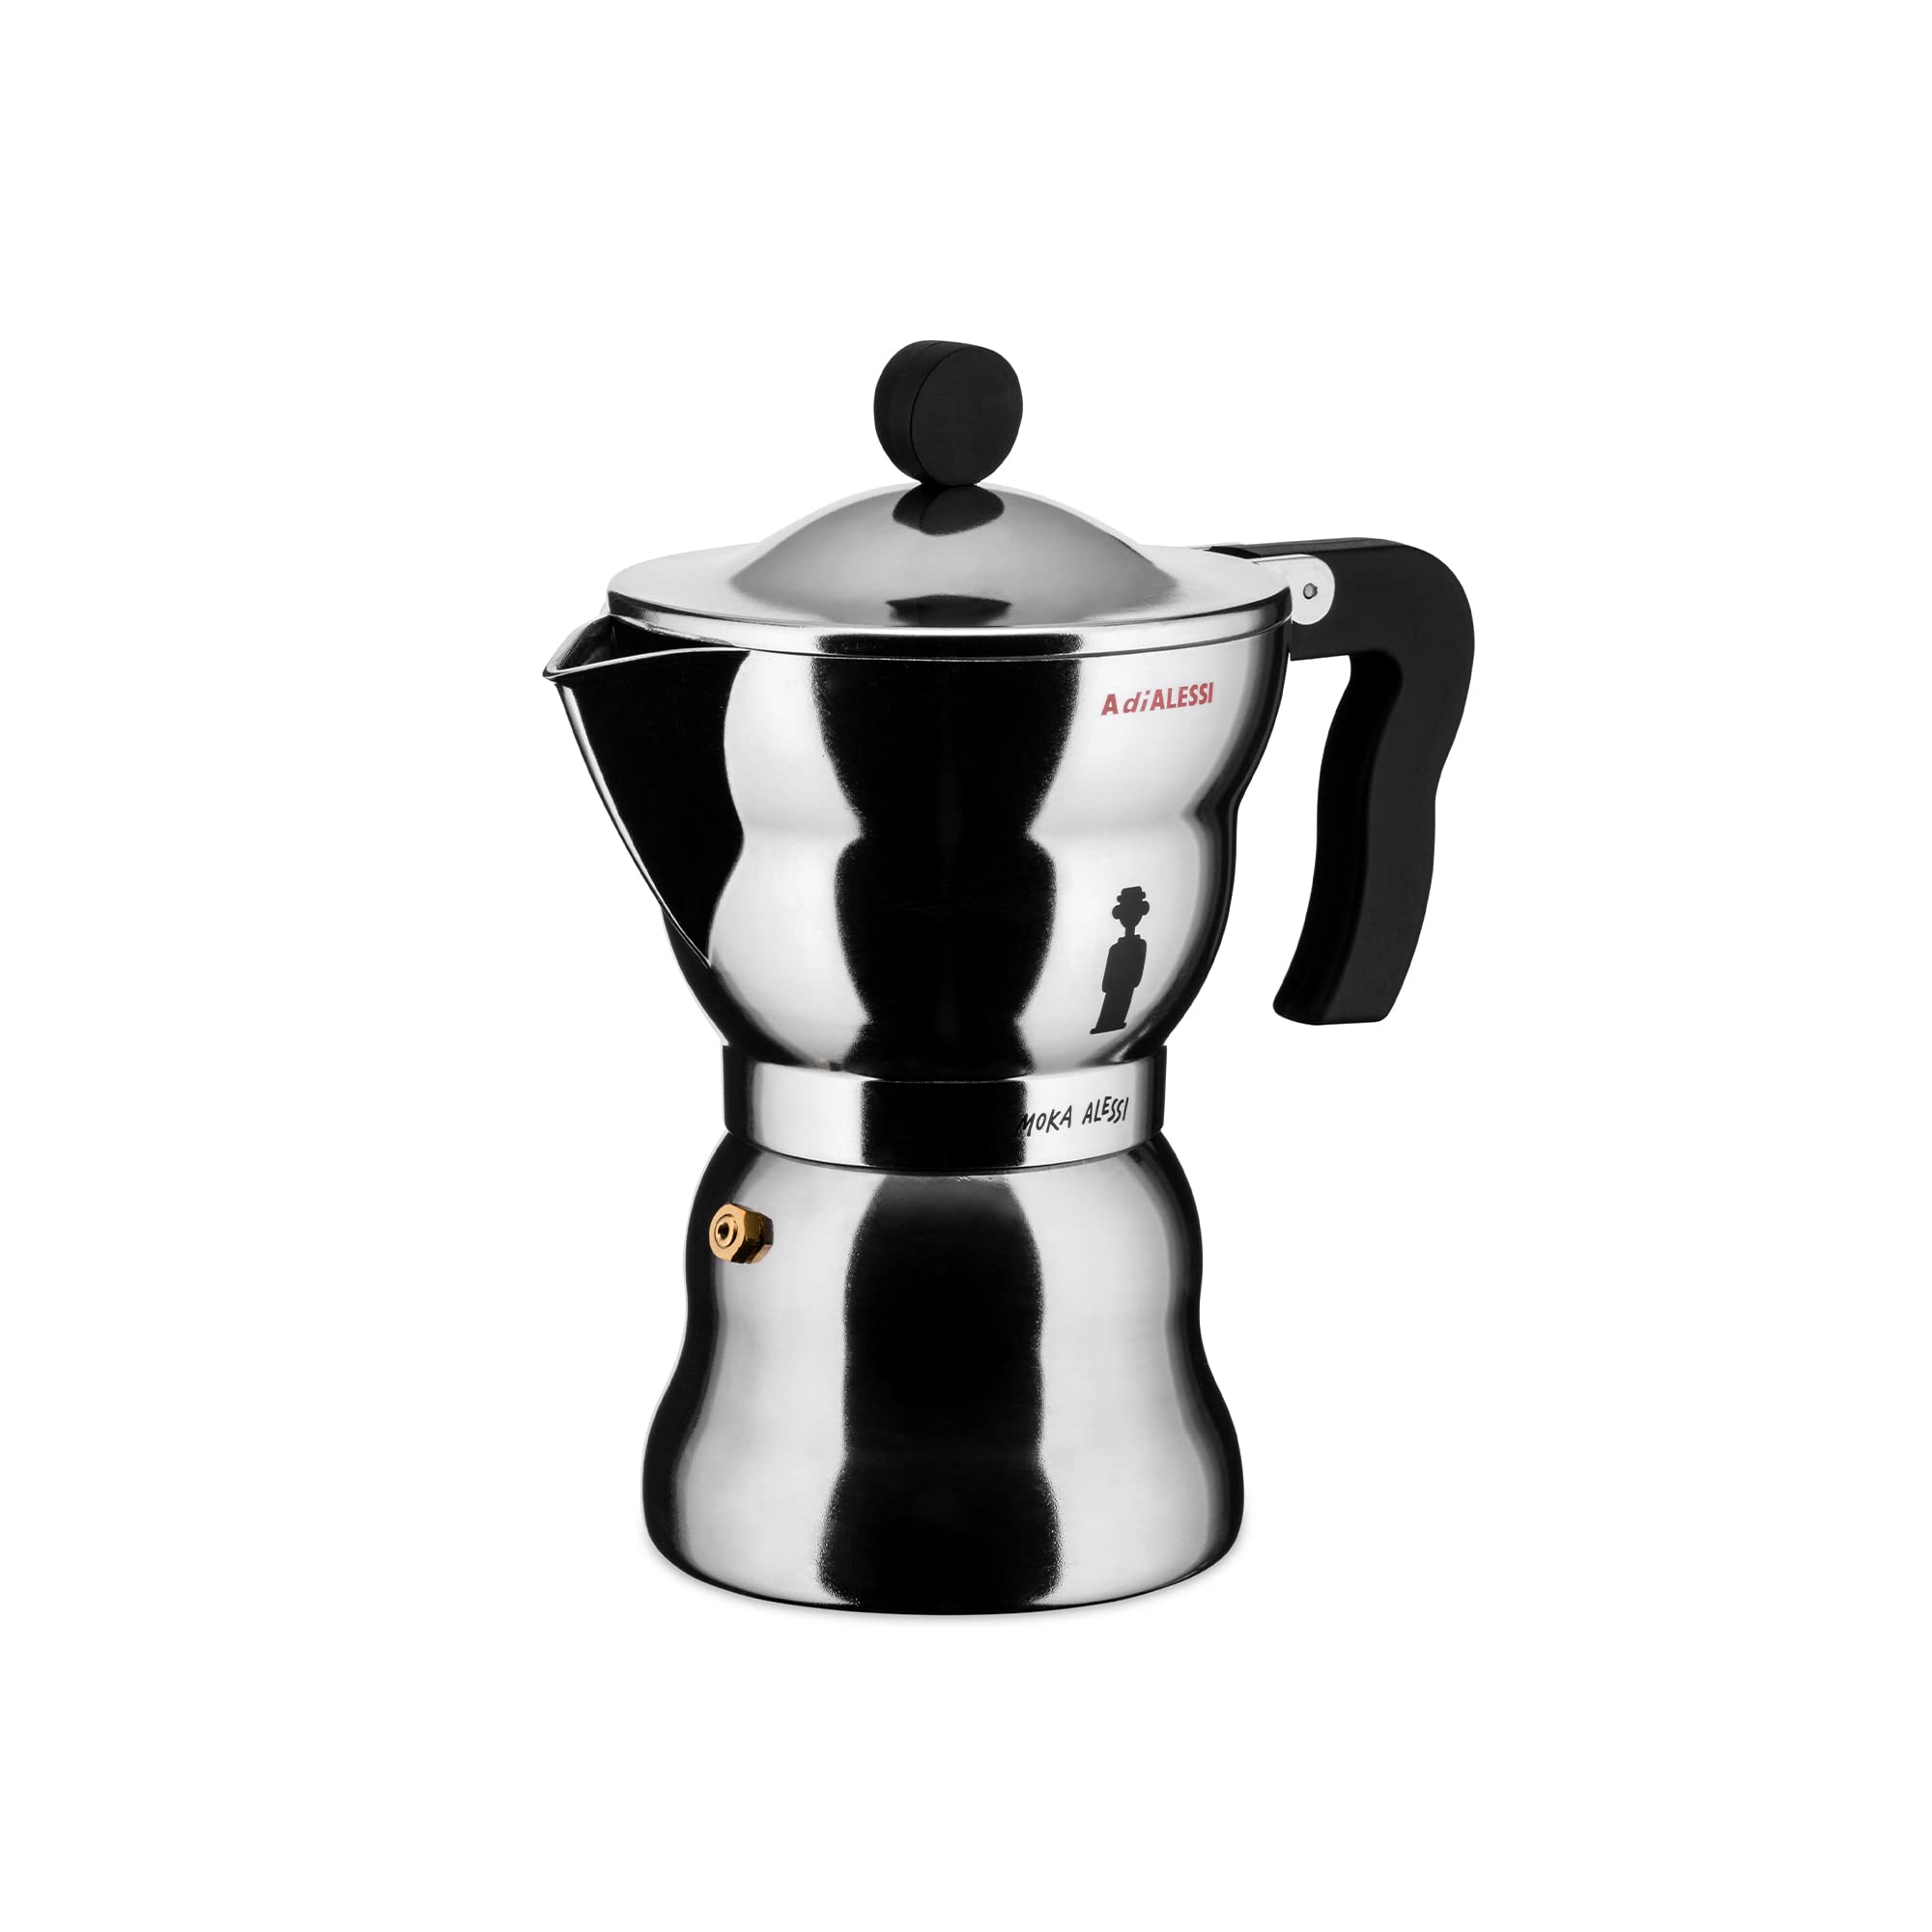 Alessi AAM33/6 - Design Espresso Coffee Maker, Aluminum and Thermoplastic Resin, 6 Cups, Black Handle